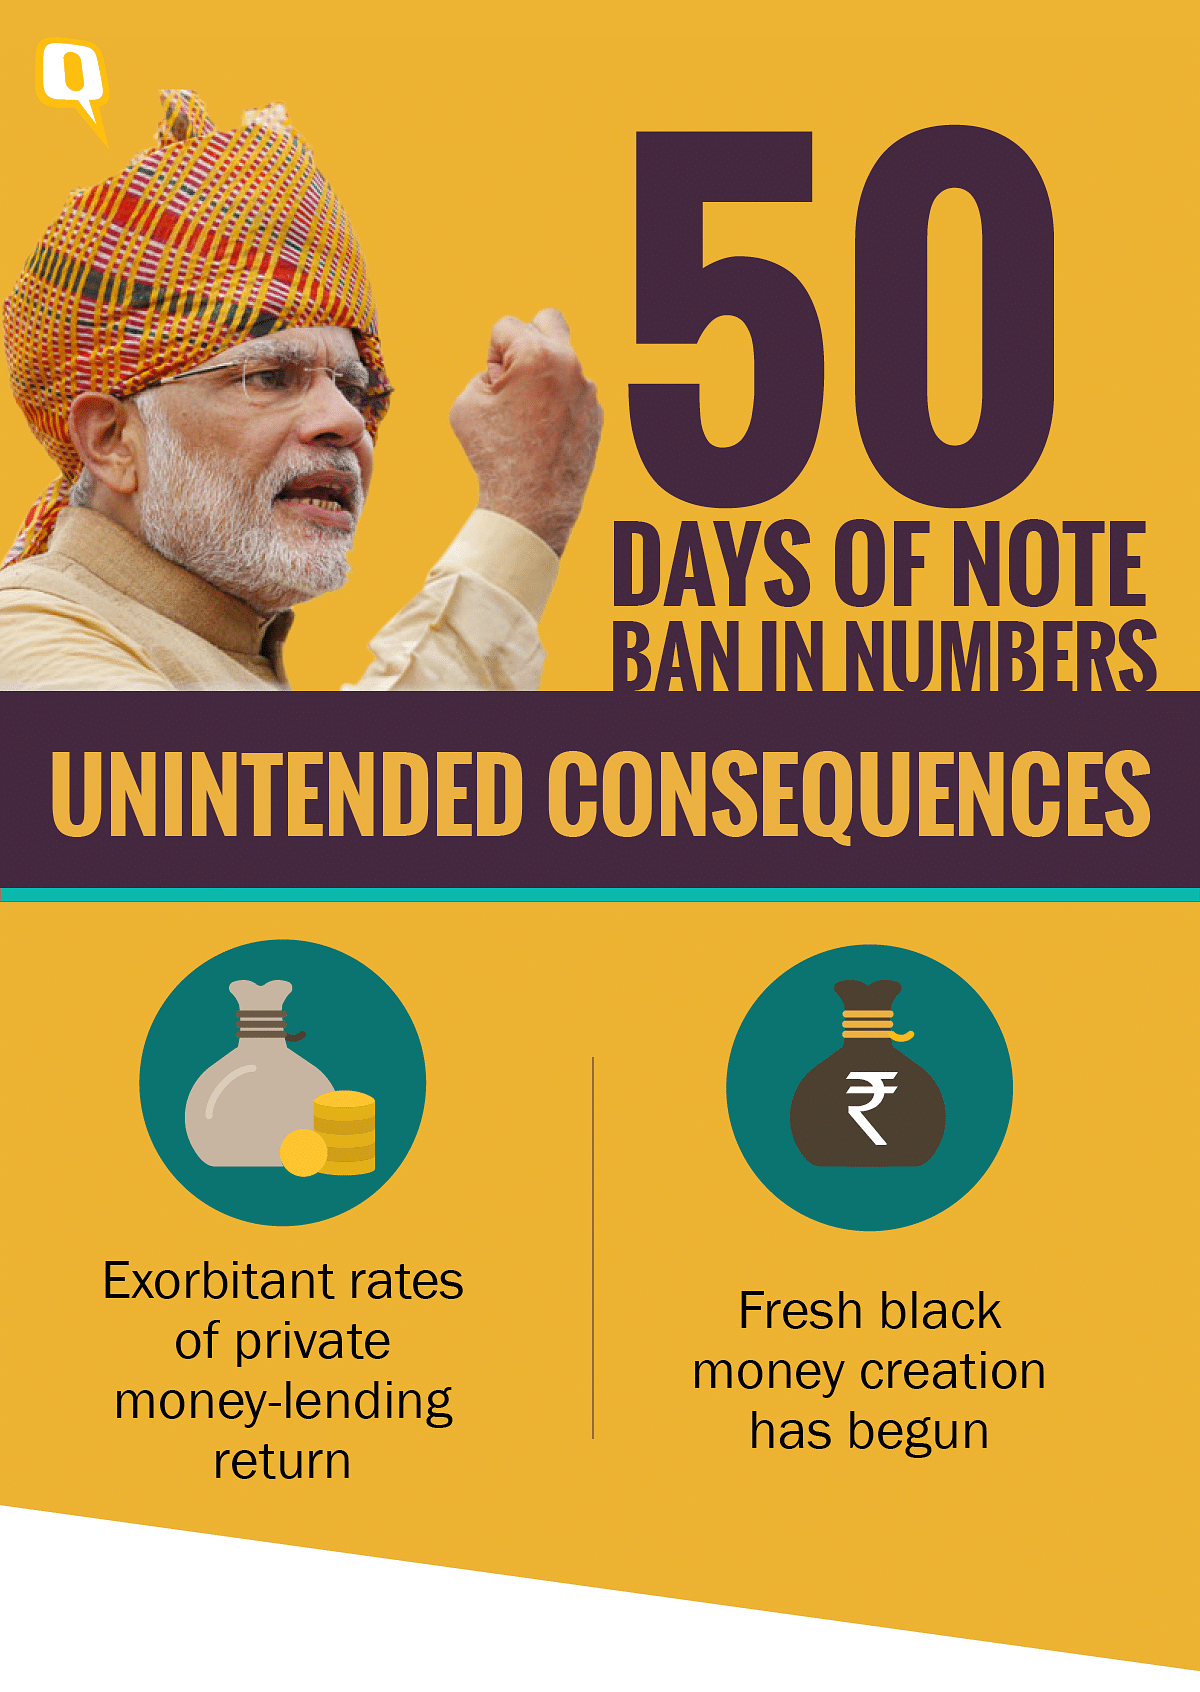 

The direct cost of demonetisation is going to be huge. But what about some of the unintended consequences?